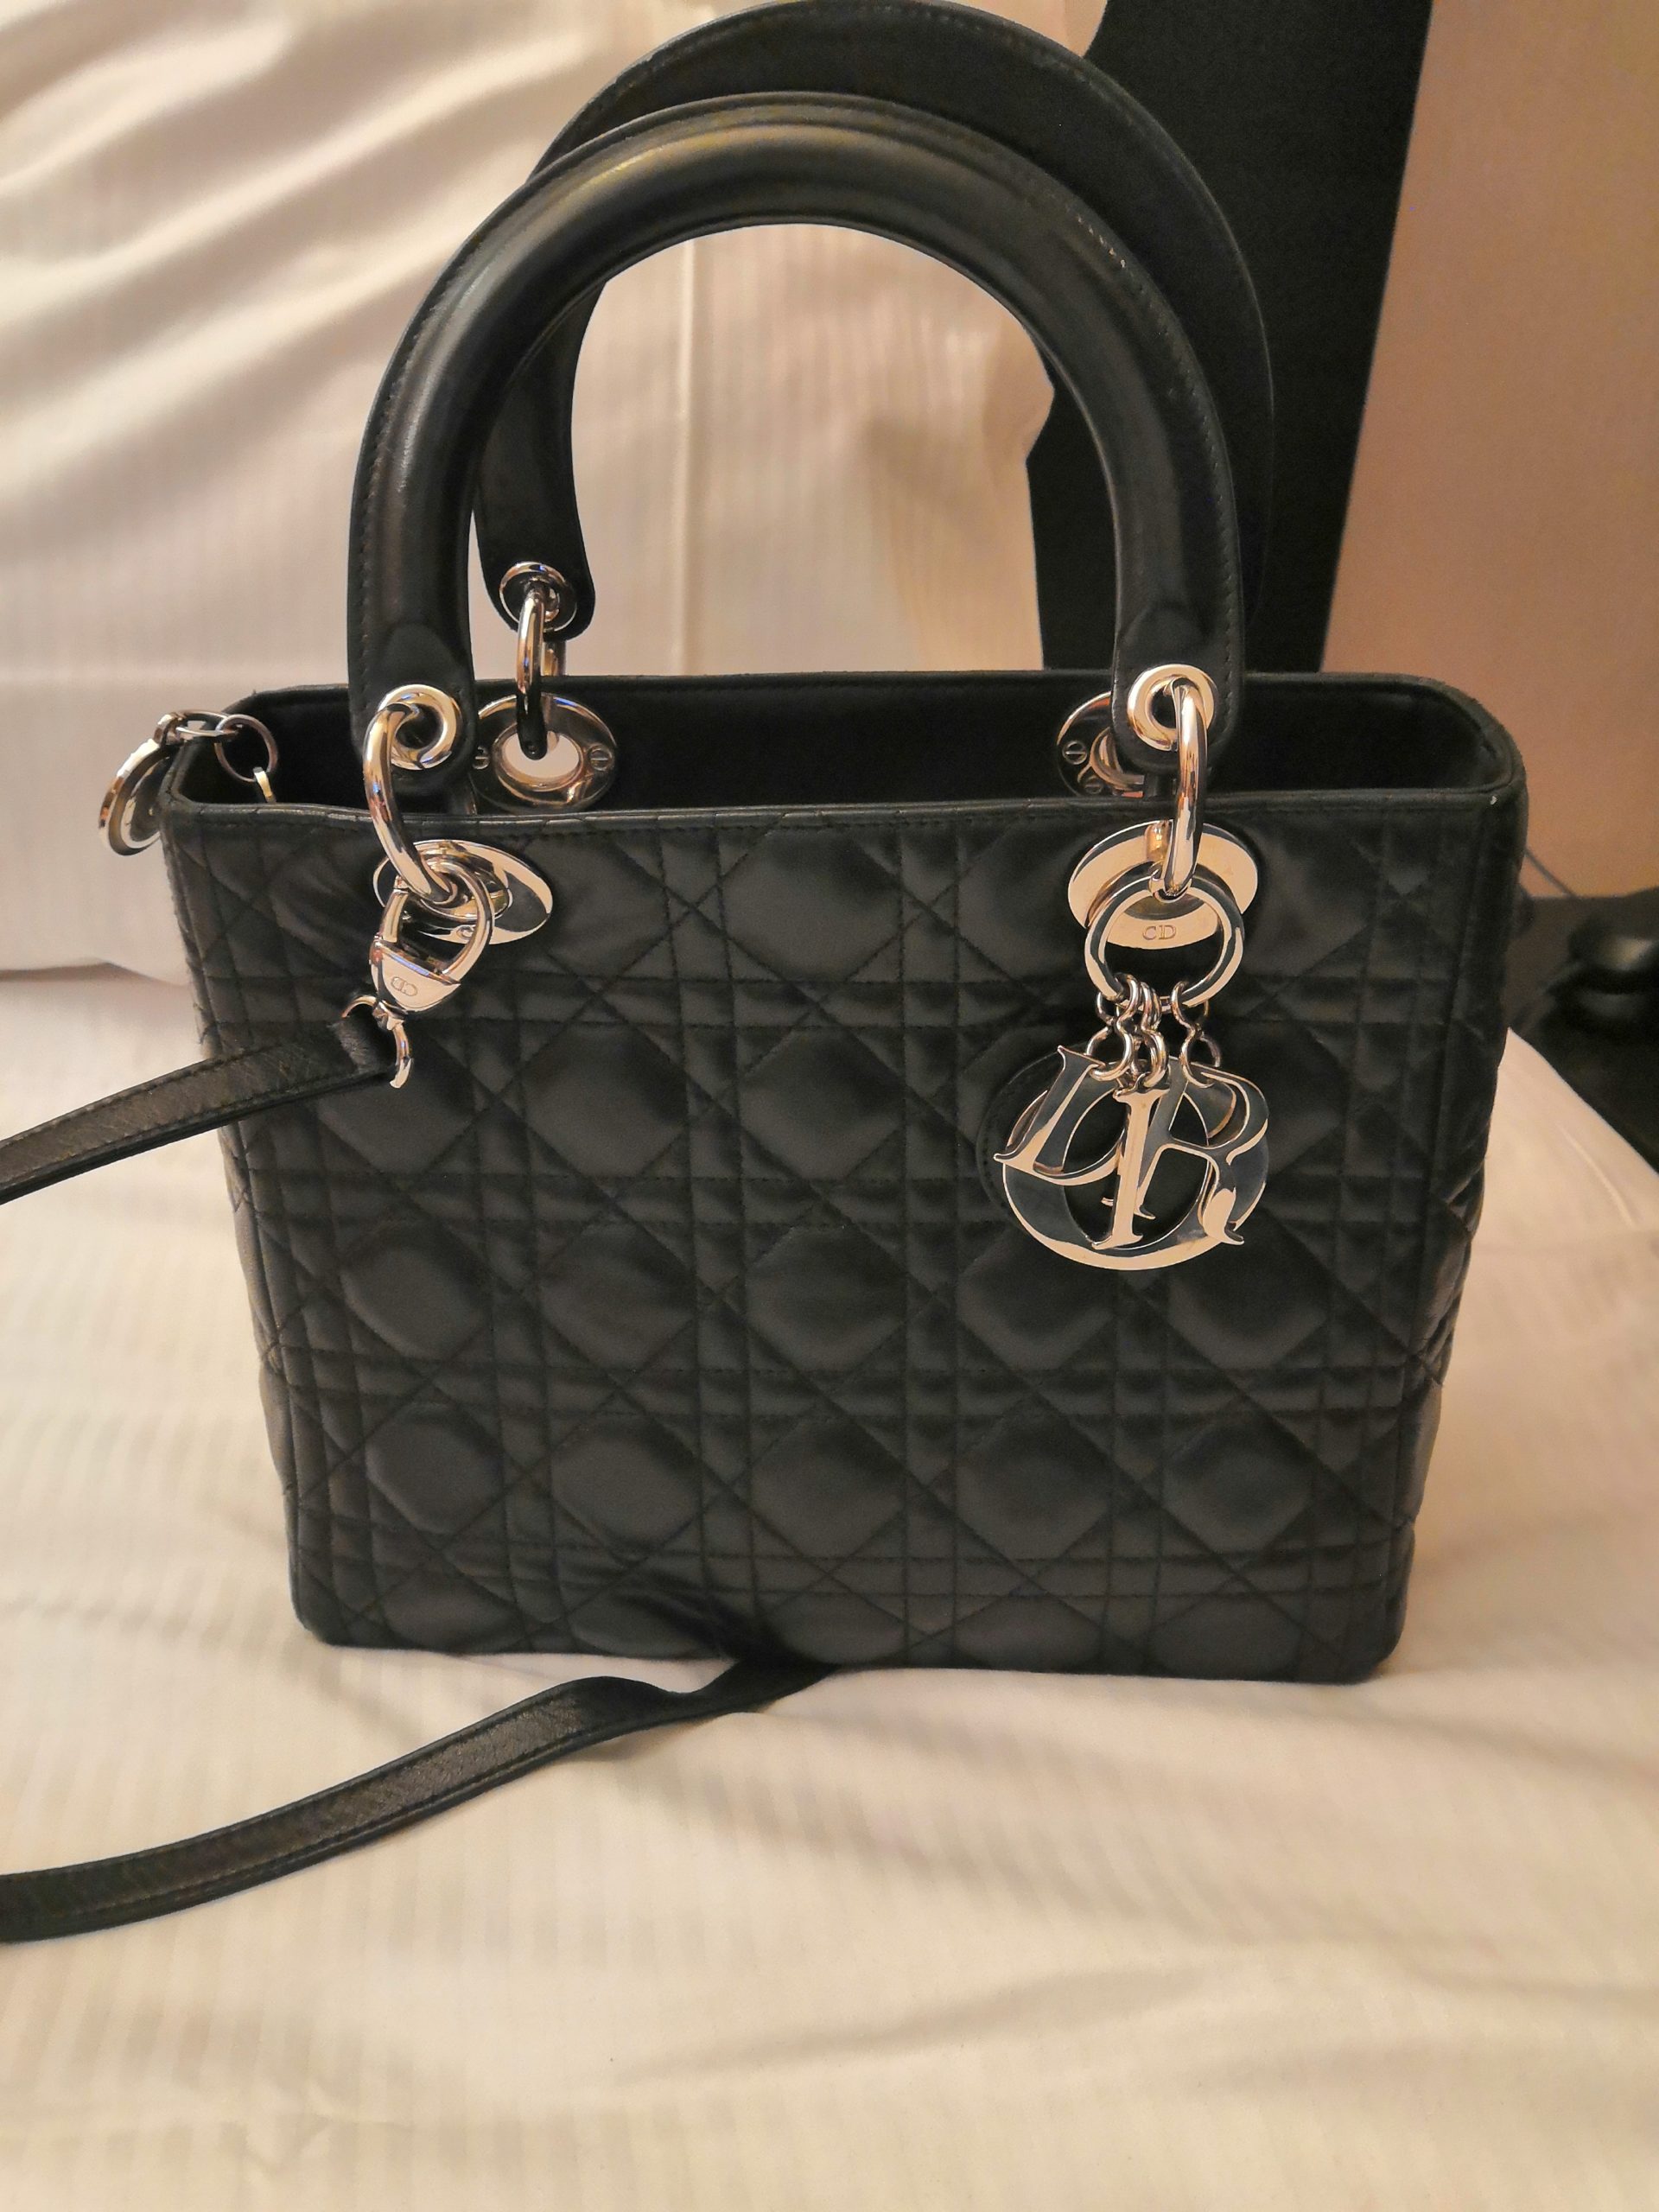 catch Trademark Rapid lady dior Canada Involved Insignificant